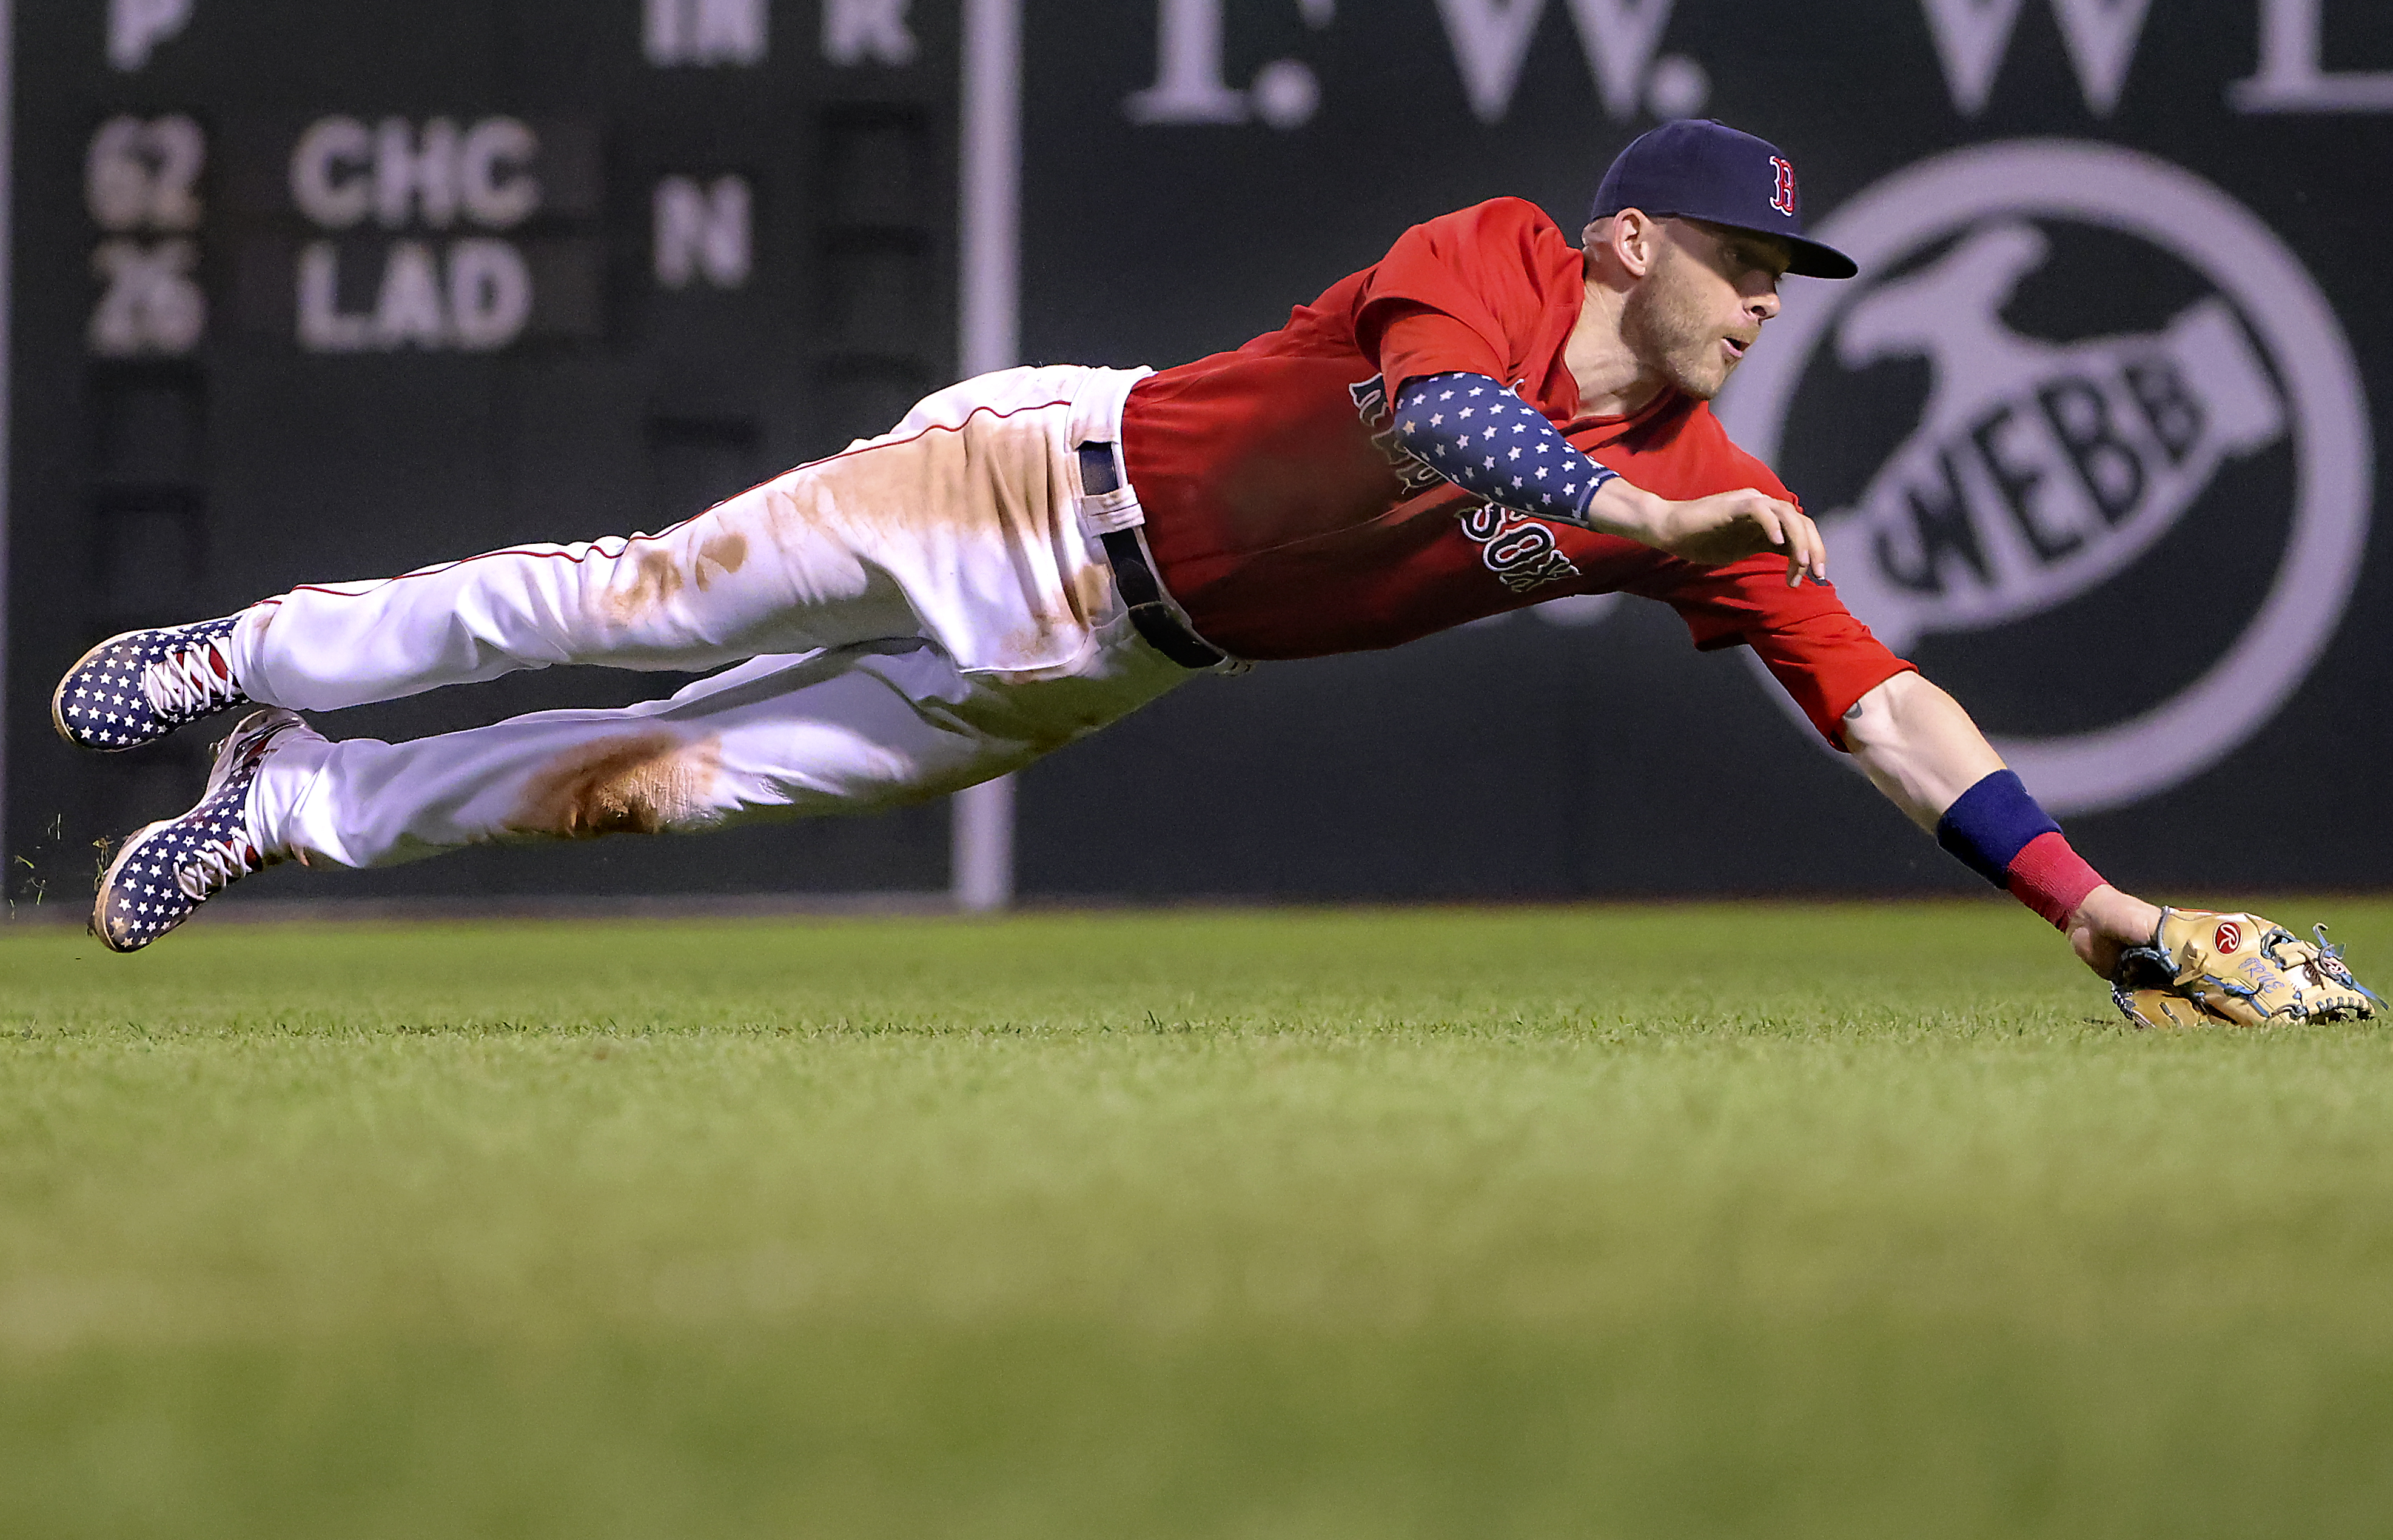 Trevor Story thriving in position change with Boston Red Sox